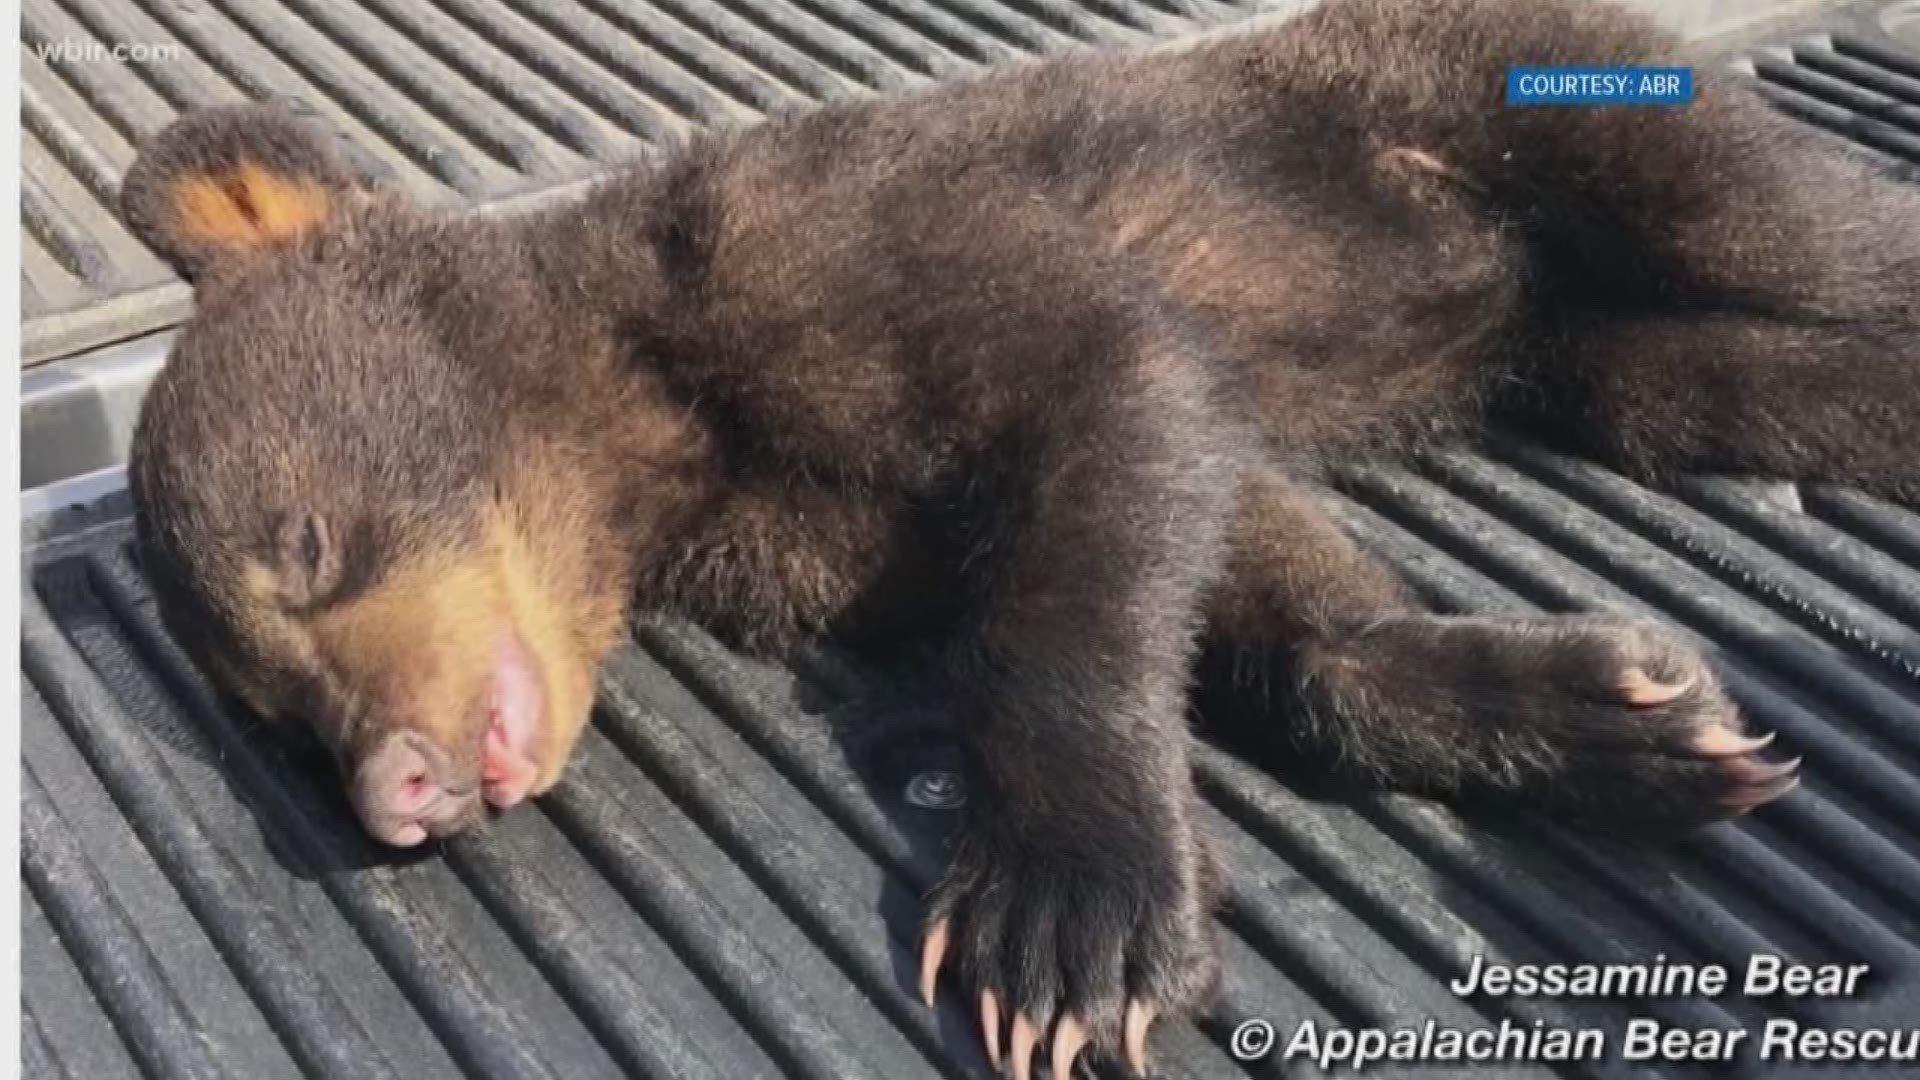 Appalachian Bear Rescue is currently looking after 11 bears, including a new cub that was airlifted from S.C.